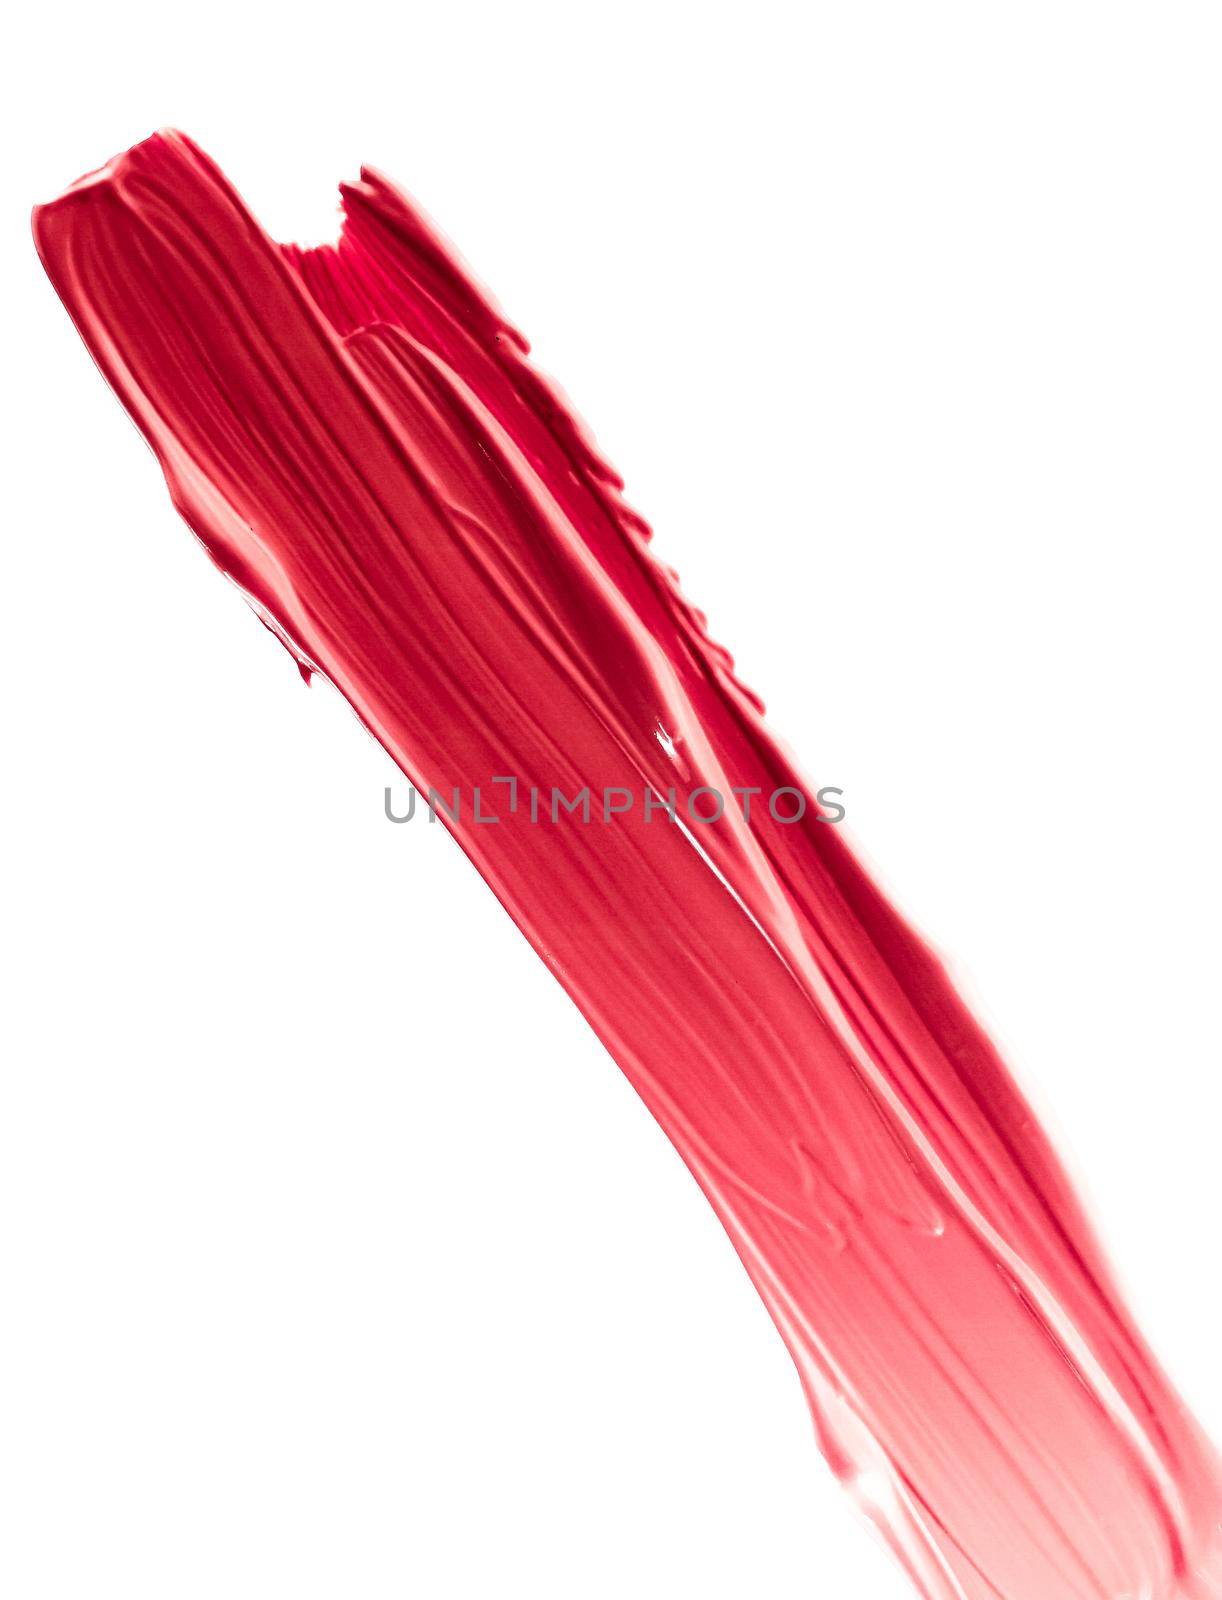 Cosmetic products, fashion and beauty concept - Lipstick smudge isolated on white background, art of make-up